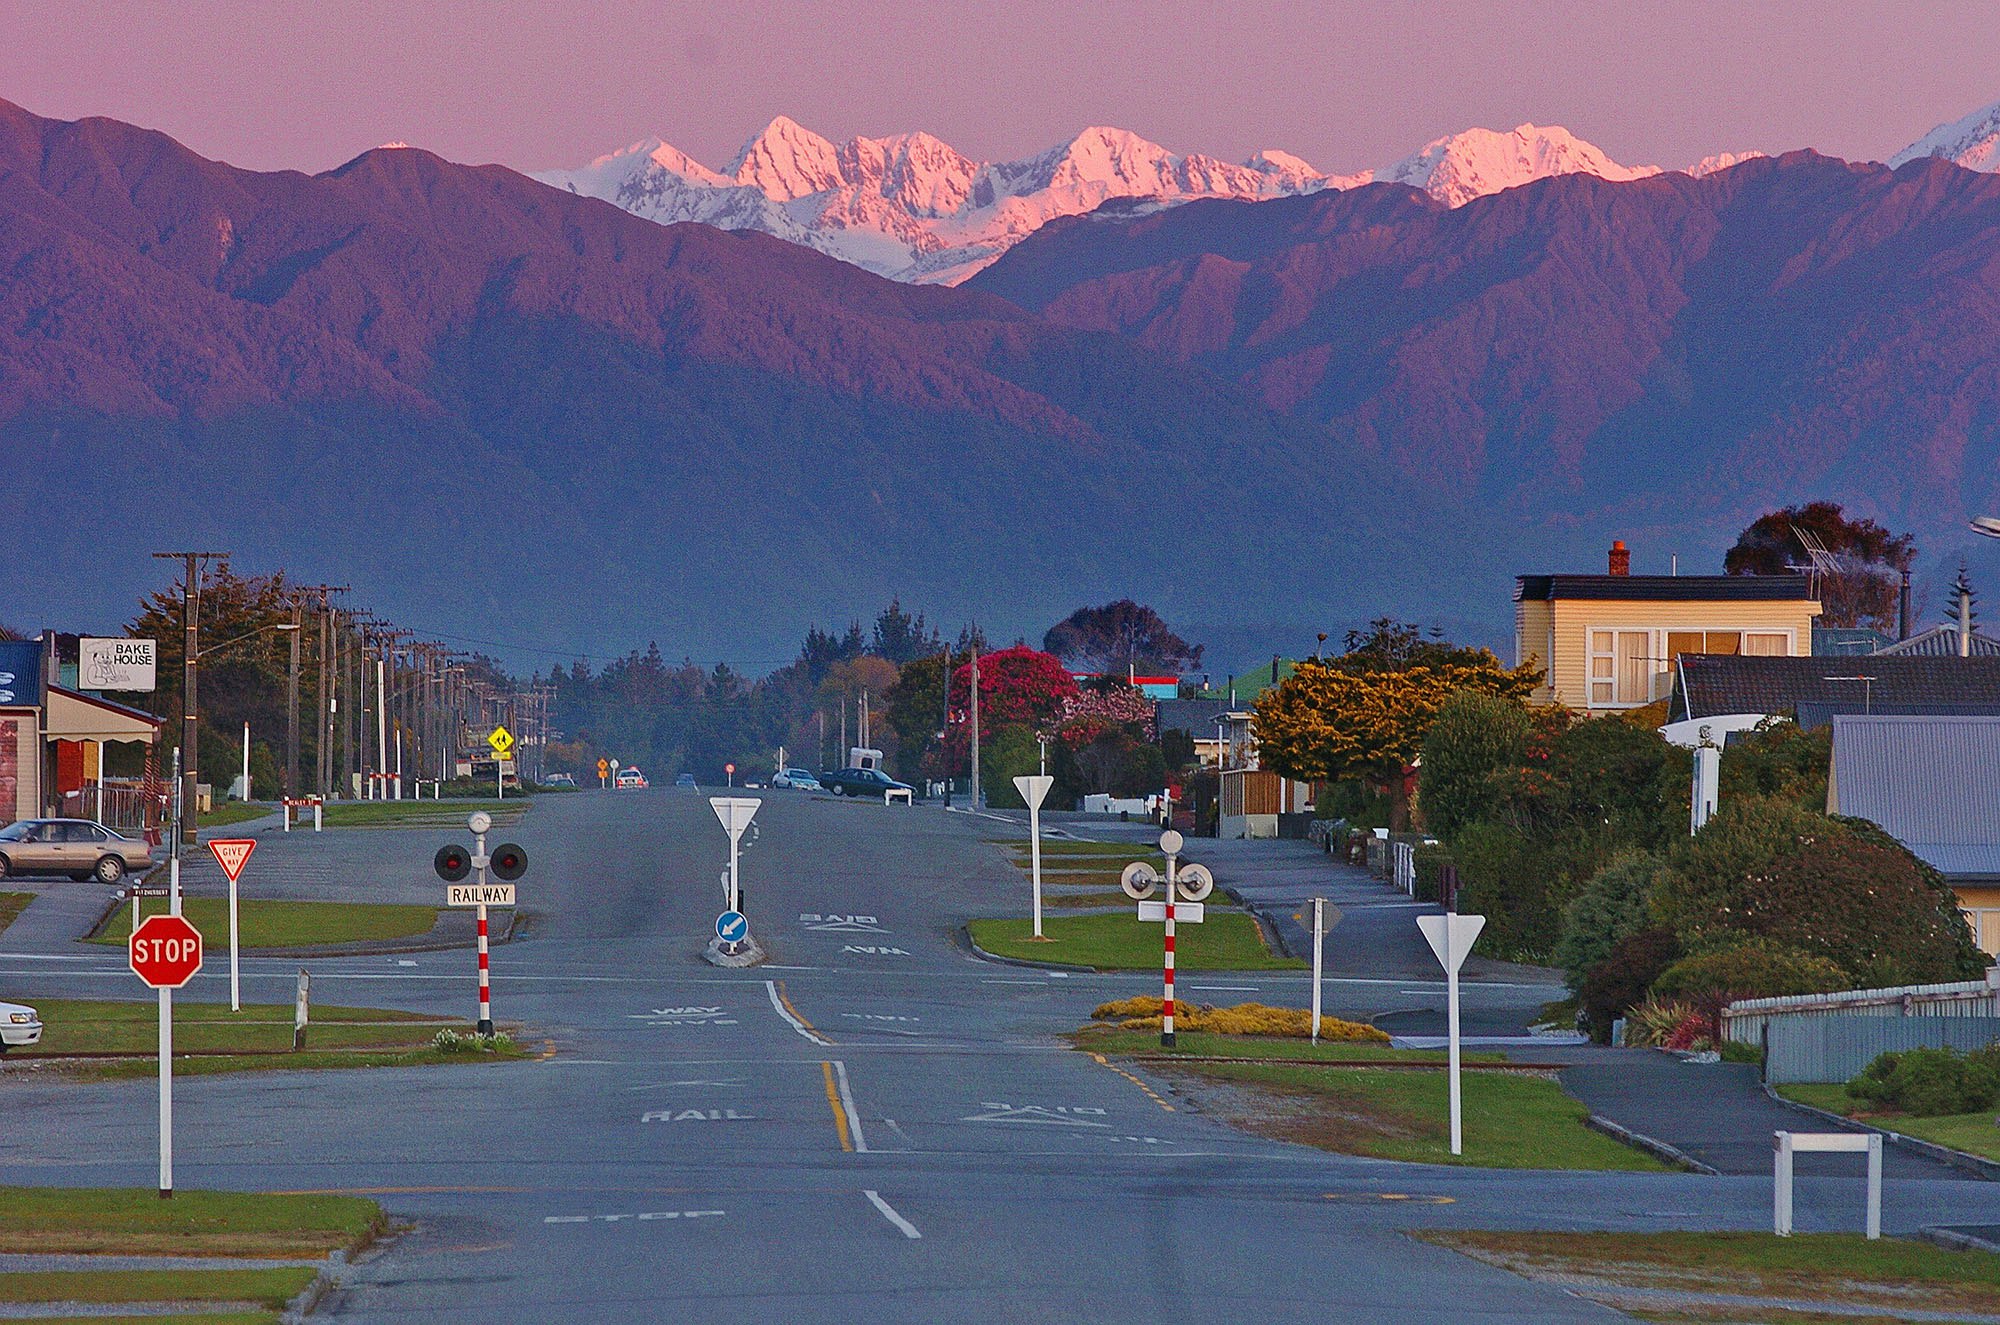 The South Island town of Hikitika at dusk